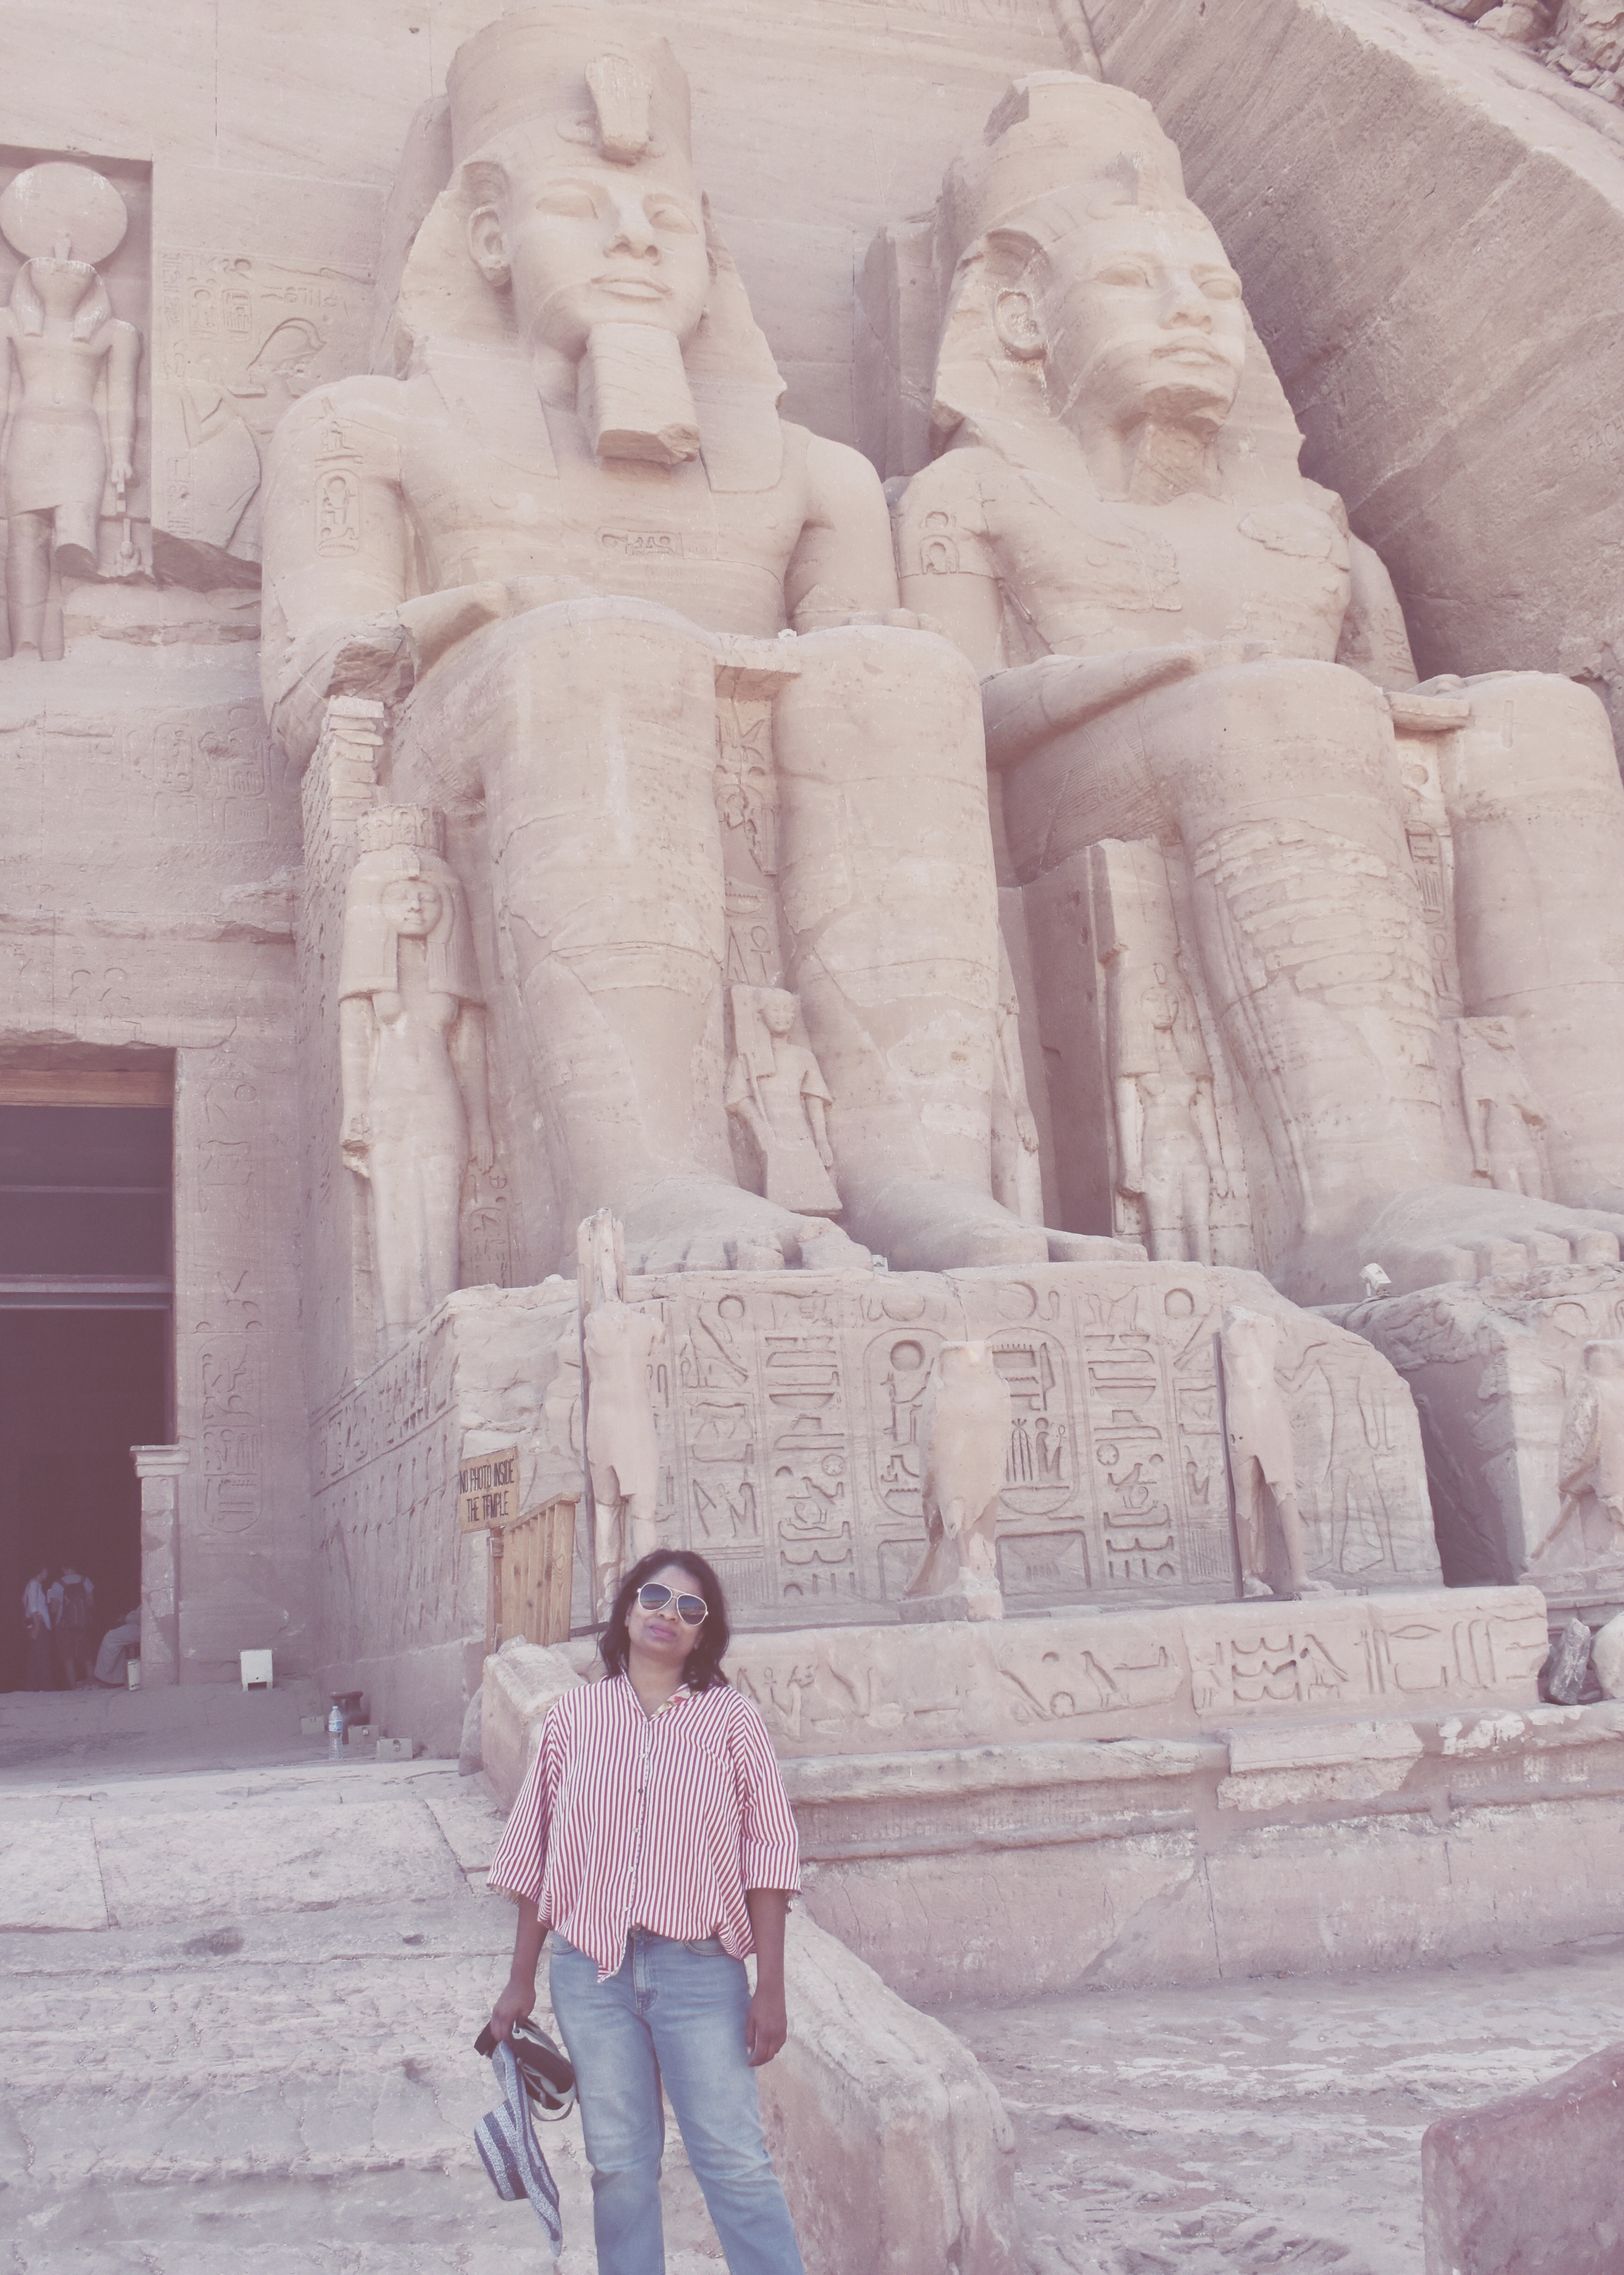 In front of the temple of Rameses